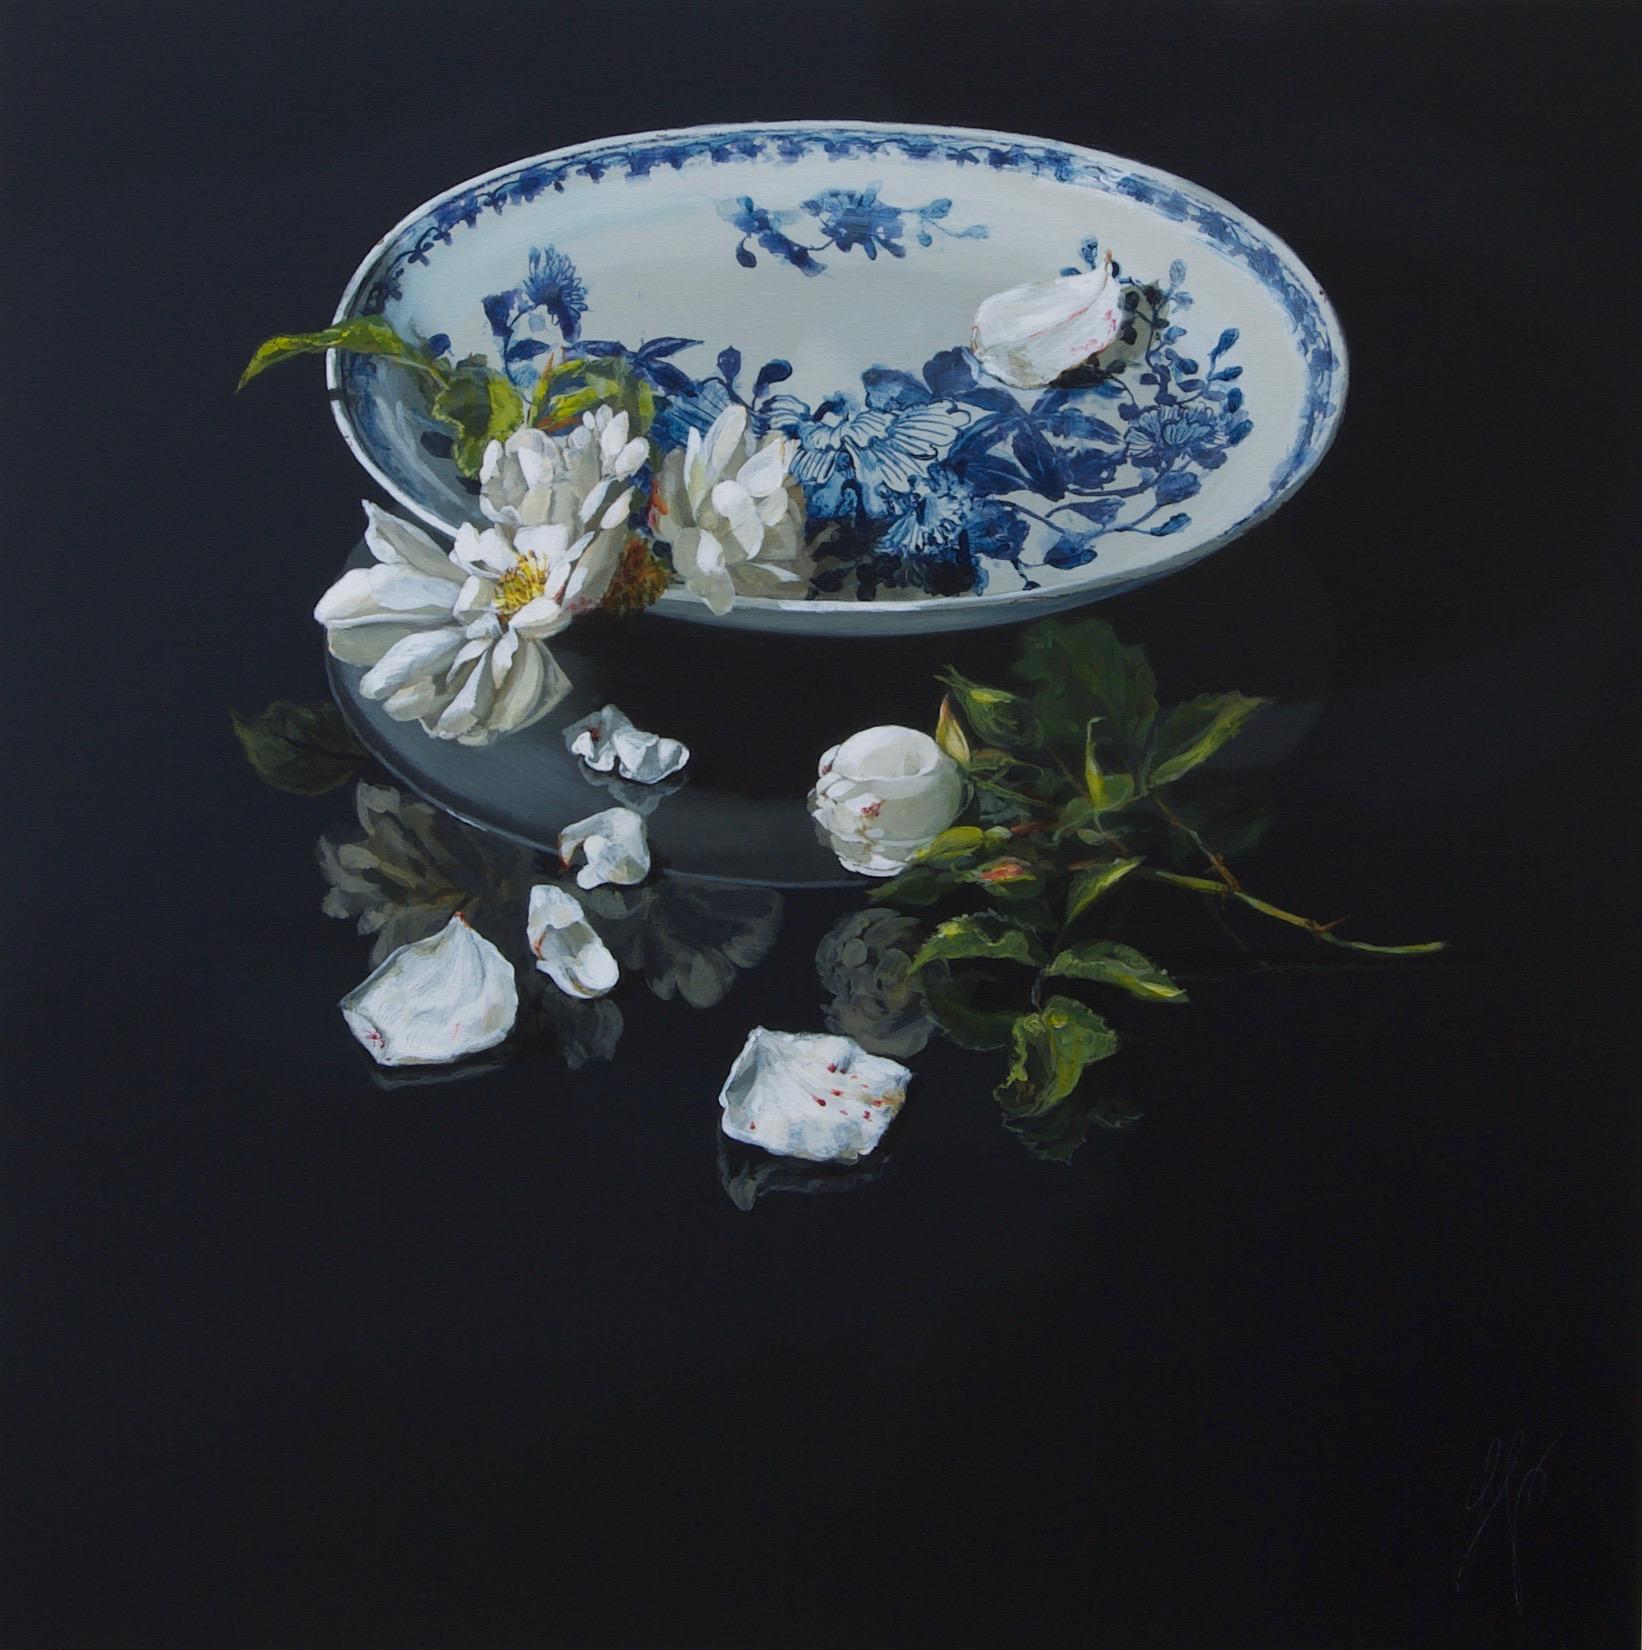 Sasja Wagenaar Still-Life Painting - ''Snow white'' Dutch Contemporary Still Life with Porcelain and Flowers